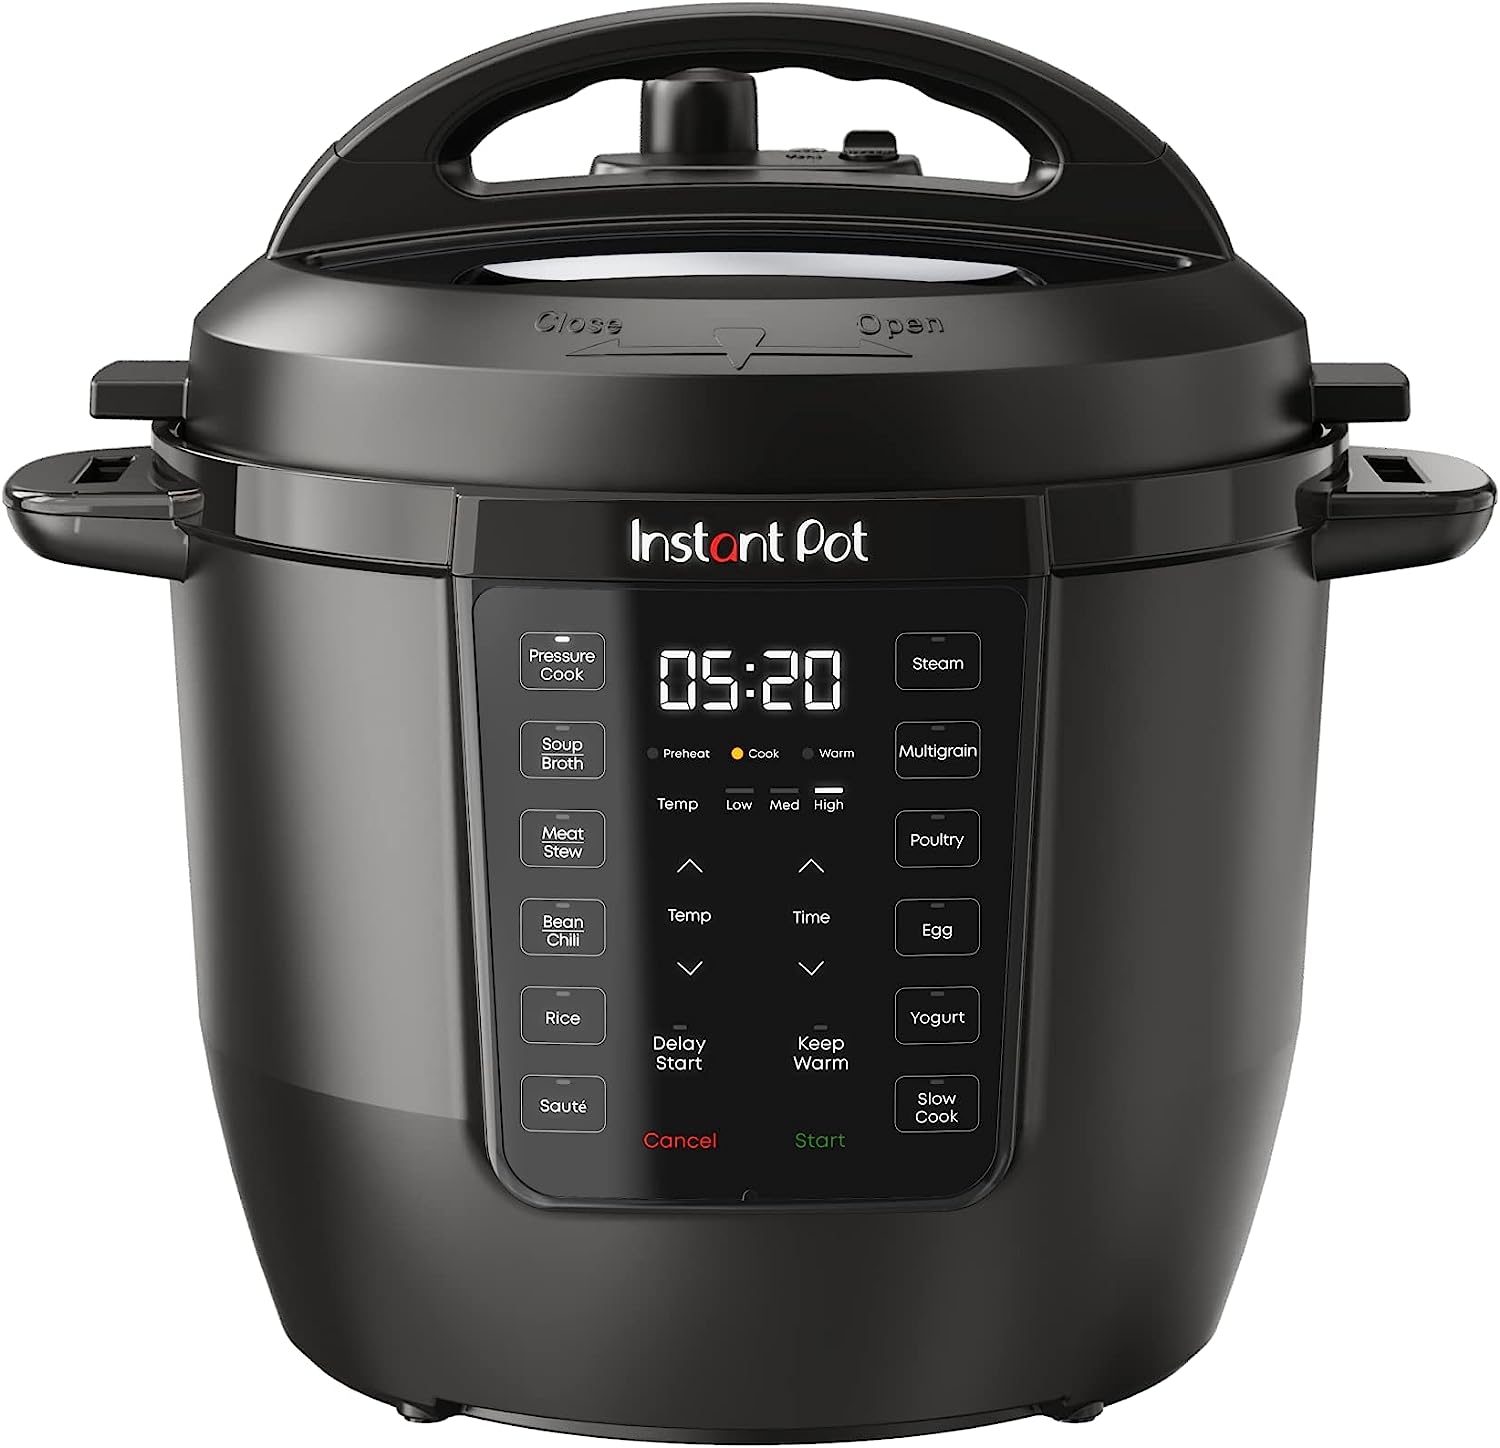 https://bigbigmart.com/wp-content/uploads/2023/07/Instant-Pot-RIO-Formerly-Known-as-Duo-7-in-1-Electric-Multi-Cooker-Pressure-Cooker-Slow-Cooker-Rice-Cooker-Steamer-Saute-Yogurt-Maker-Warmer-Includes-App-With-Over-800-Recipes-6-Quart.jpg